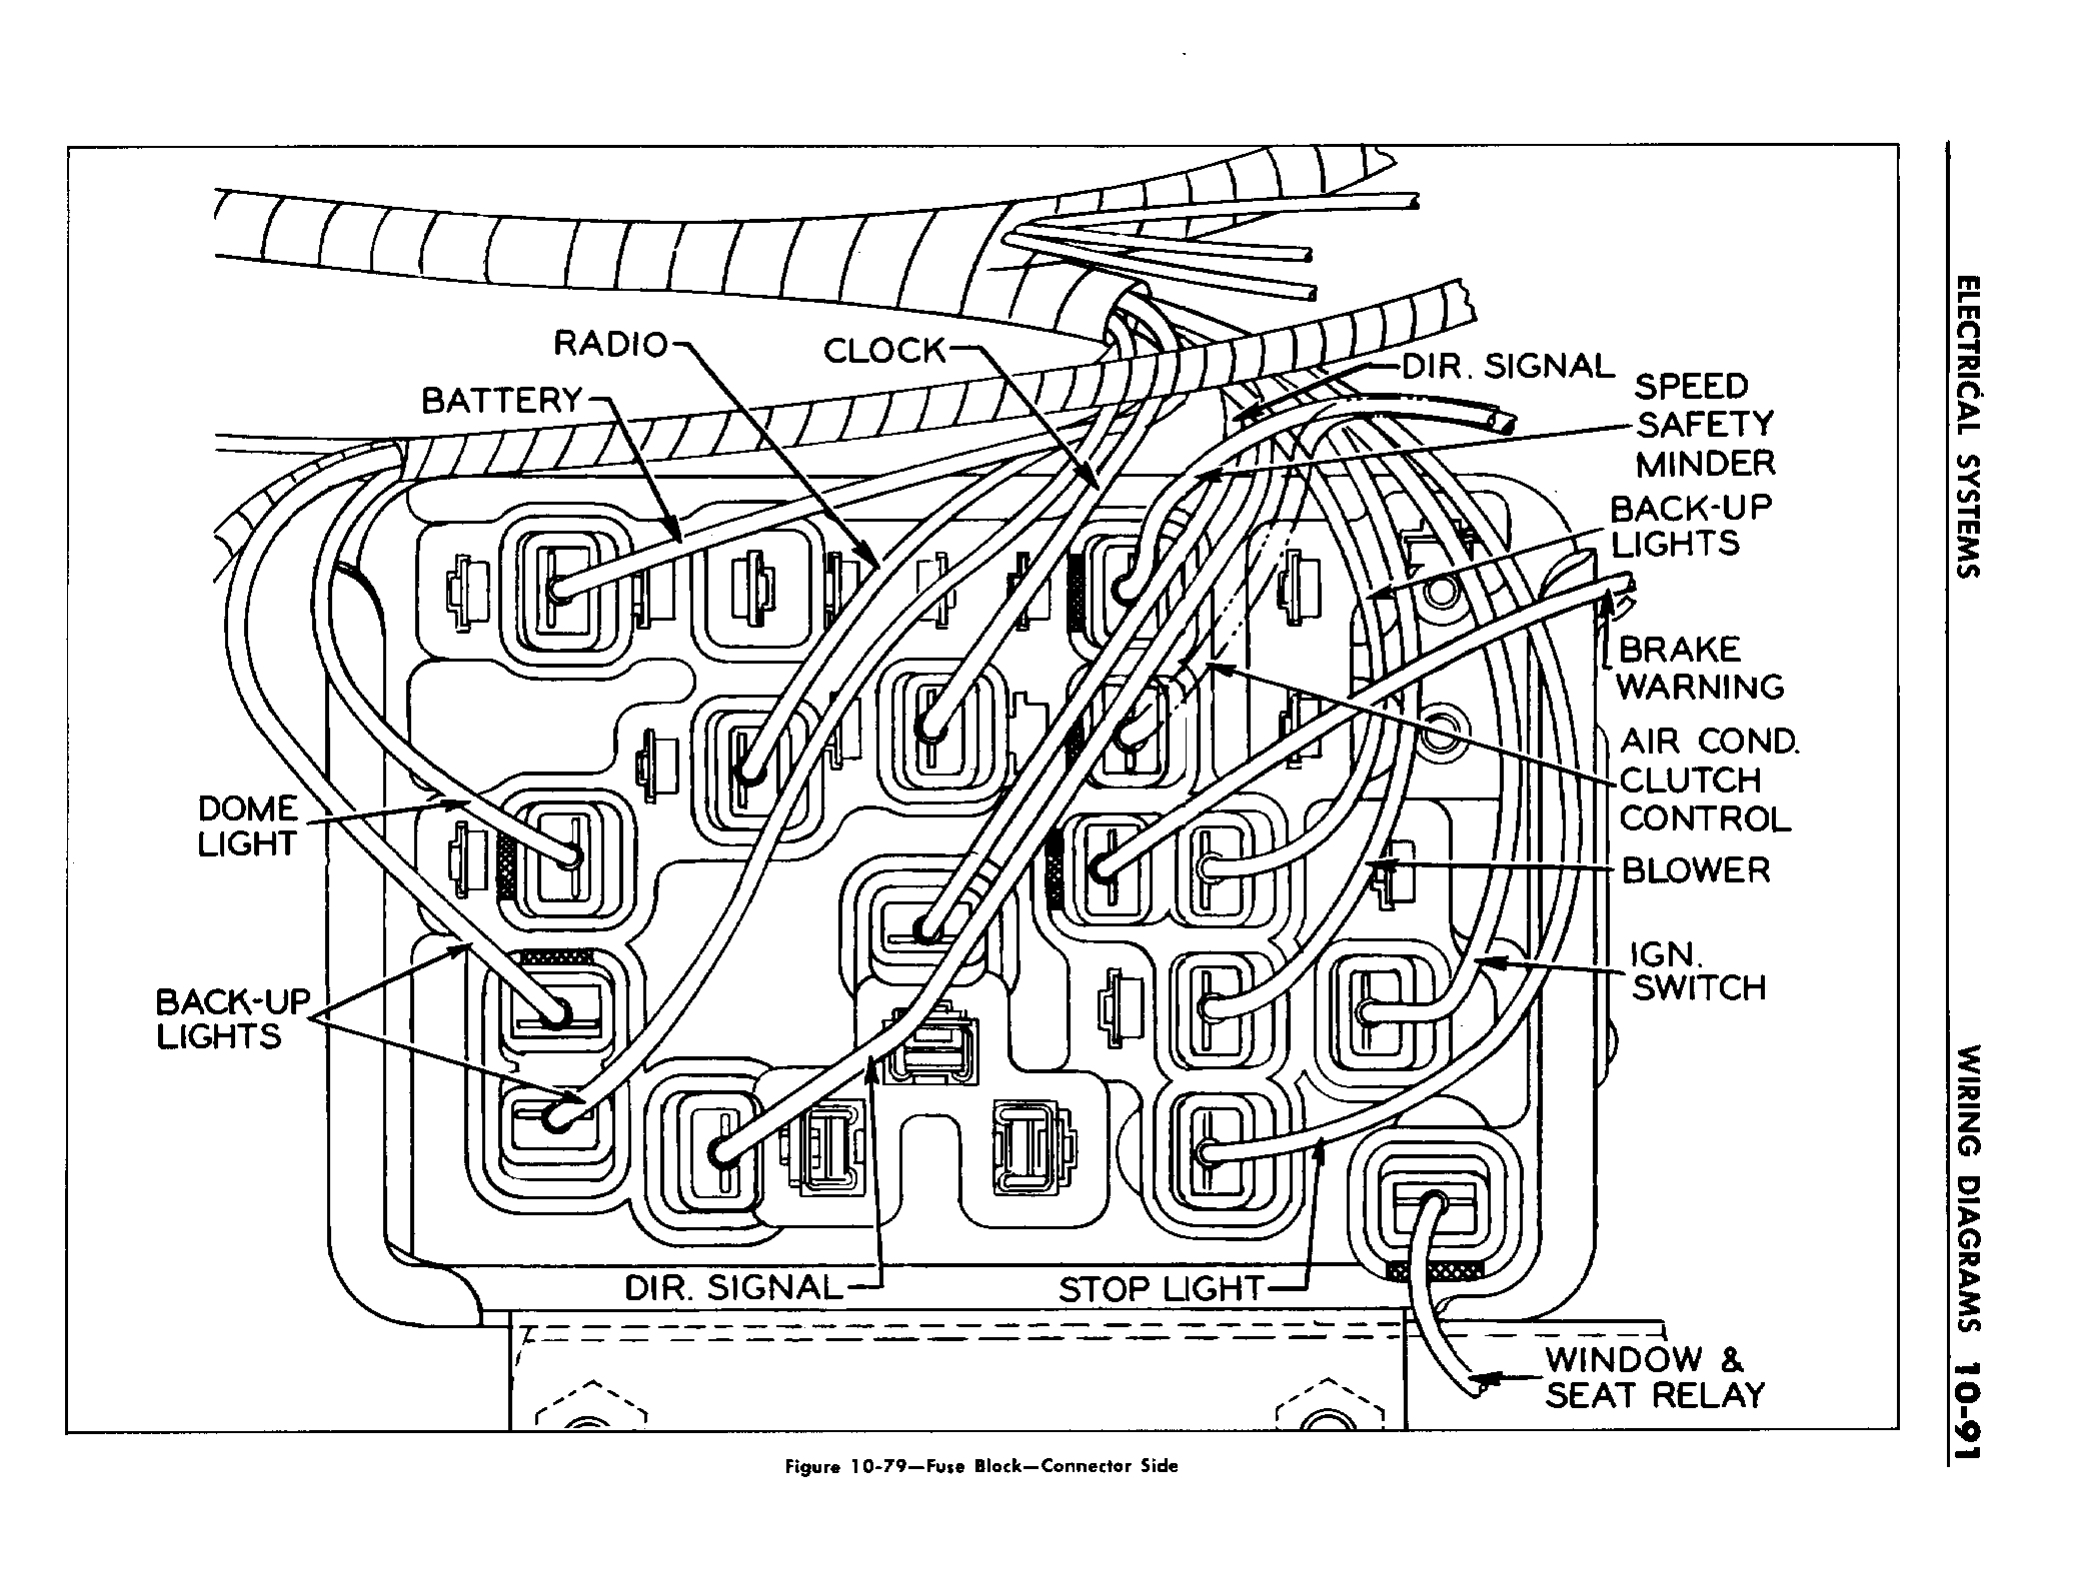 n_11 1958 Buick Shop Manual - Electrical Systems_91.jpg